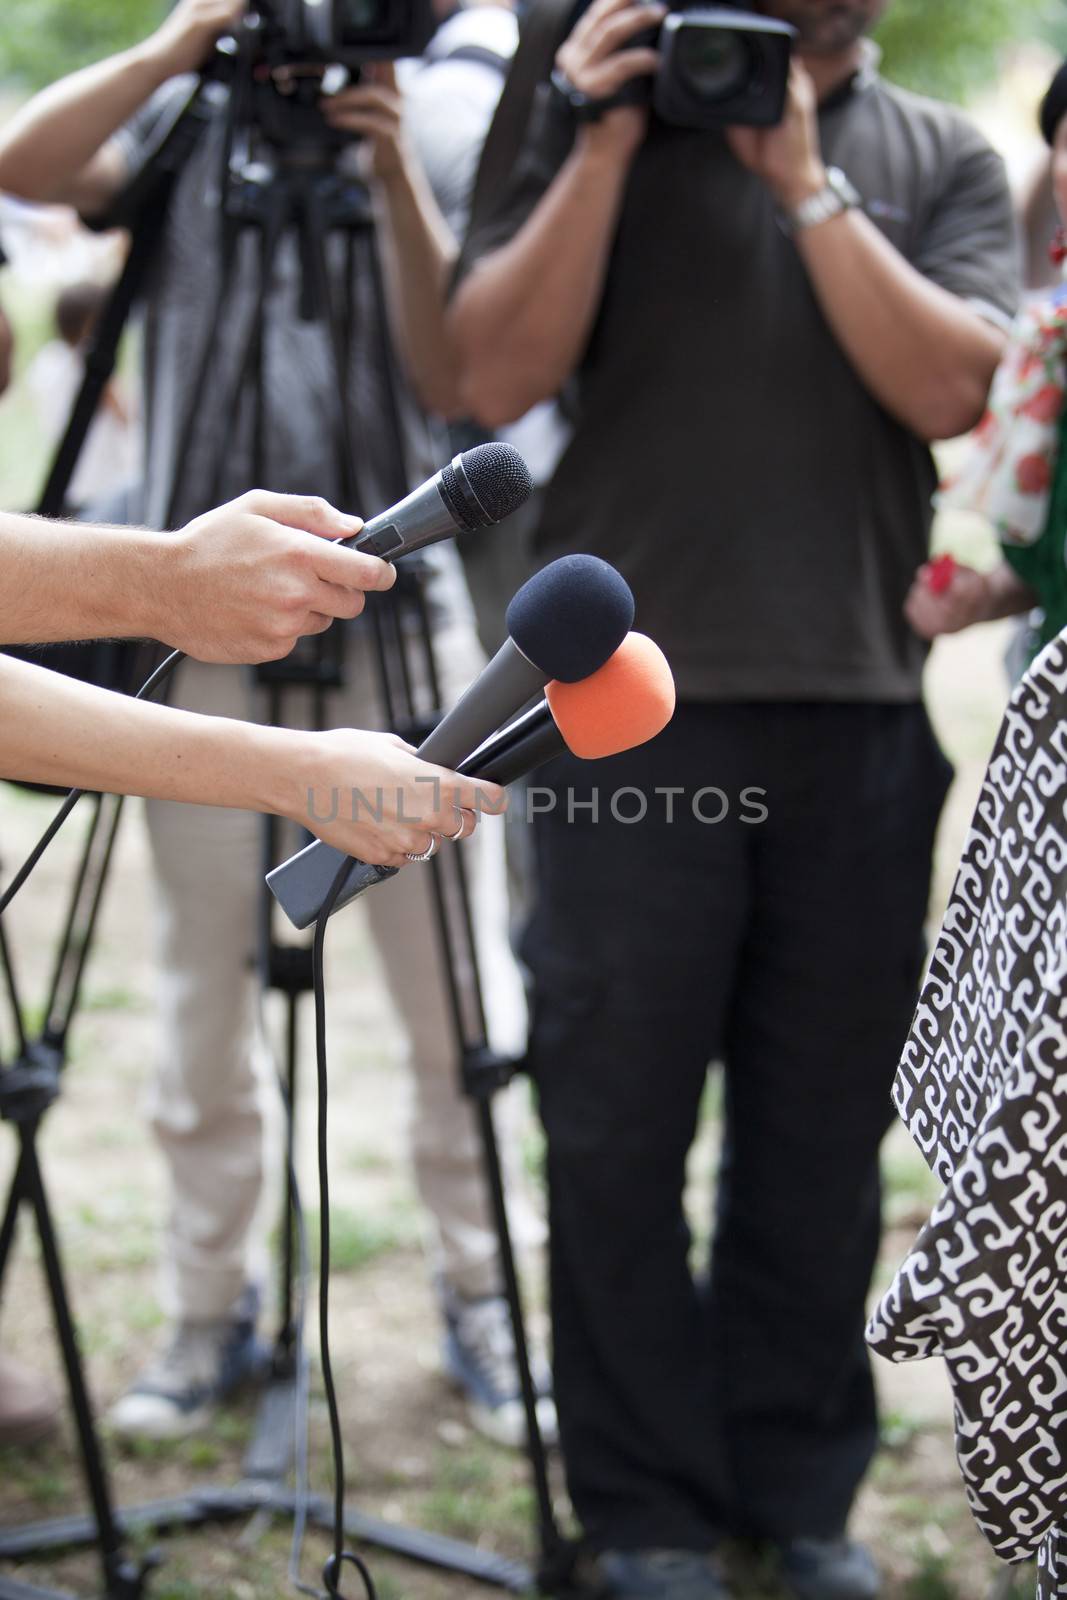 Media interview by wellphoto